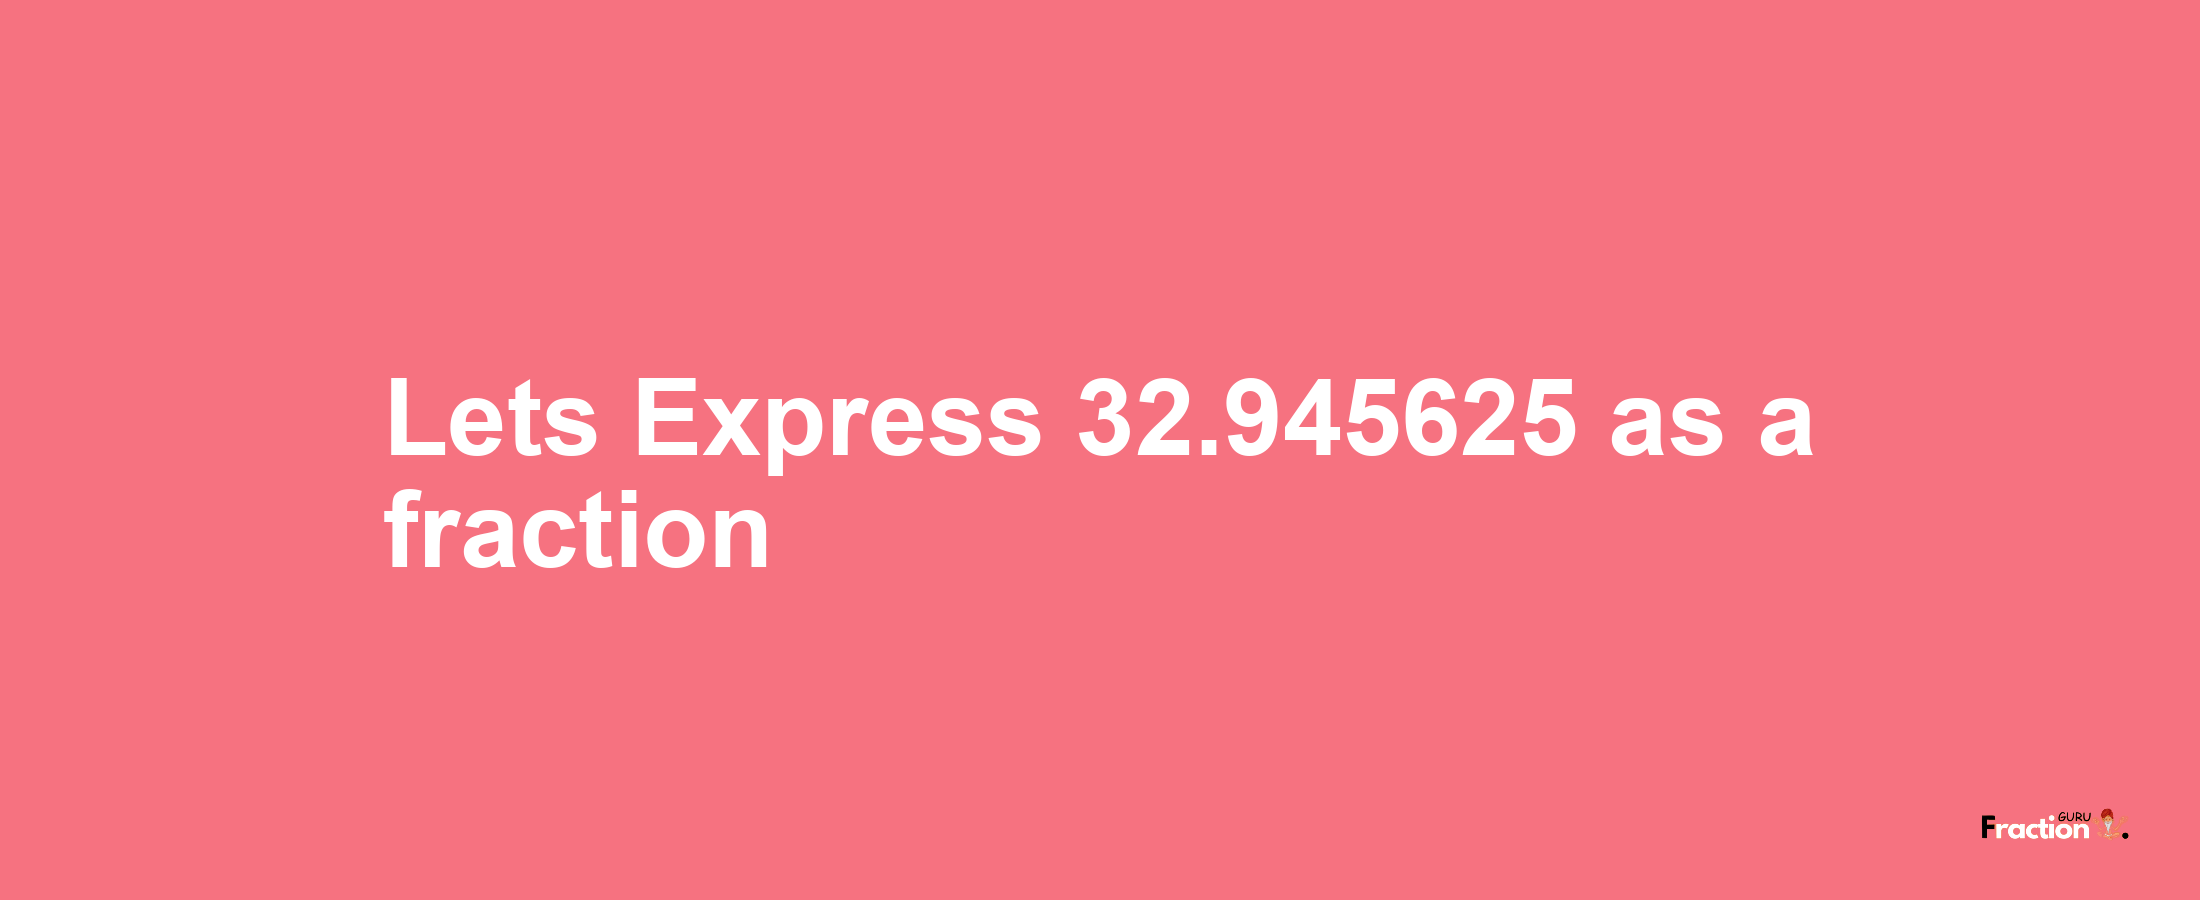 Lets Express 32.945625 as afraction